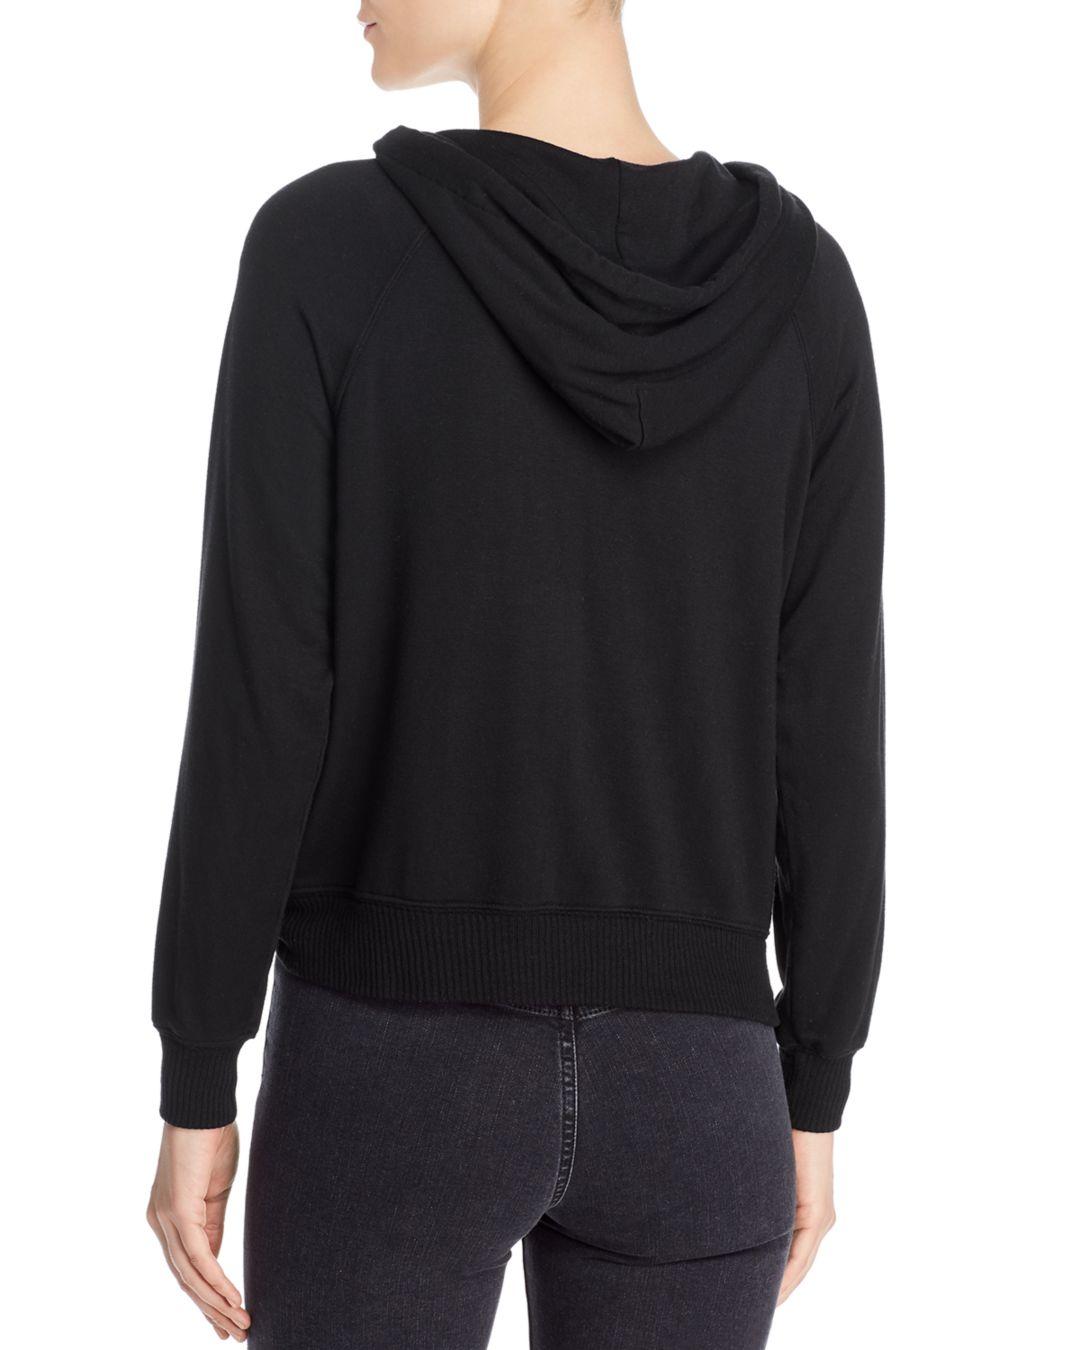 Splendid Synthetic Super Soft French Terry Hoodie in Black - Lyst